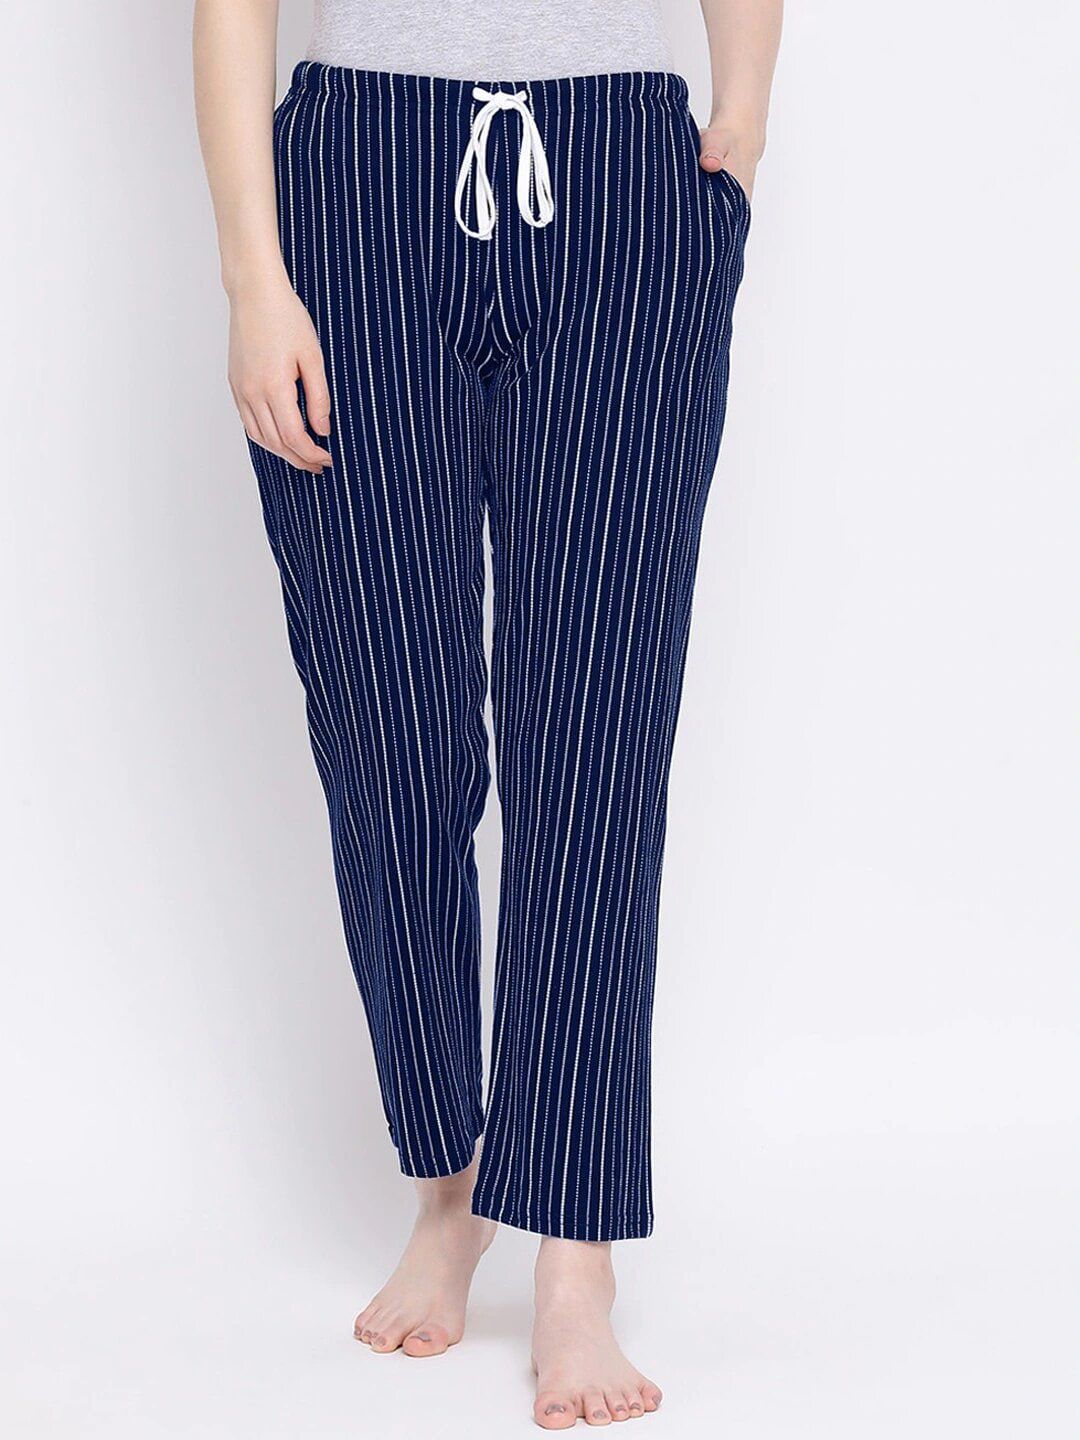 Kanvin Woman Navy Blue & White Striped Pure Cotton Lounge Pants Price in India